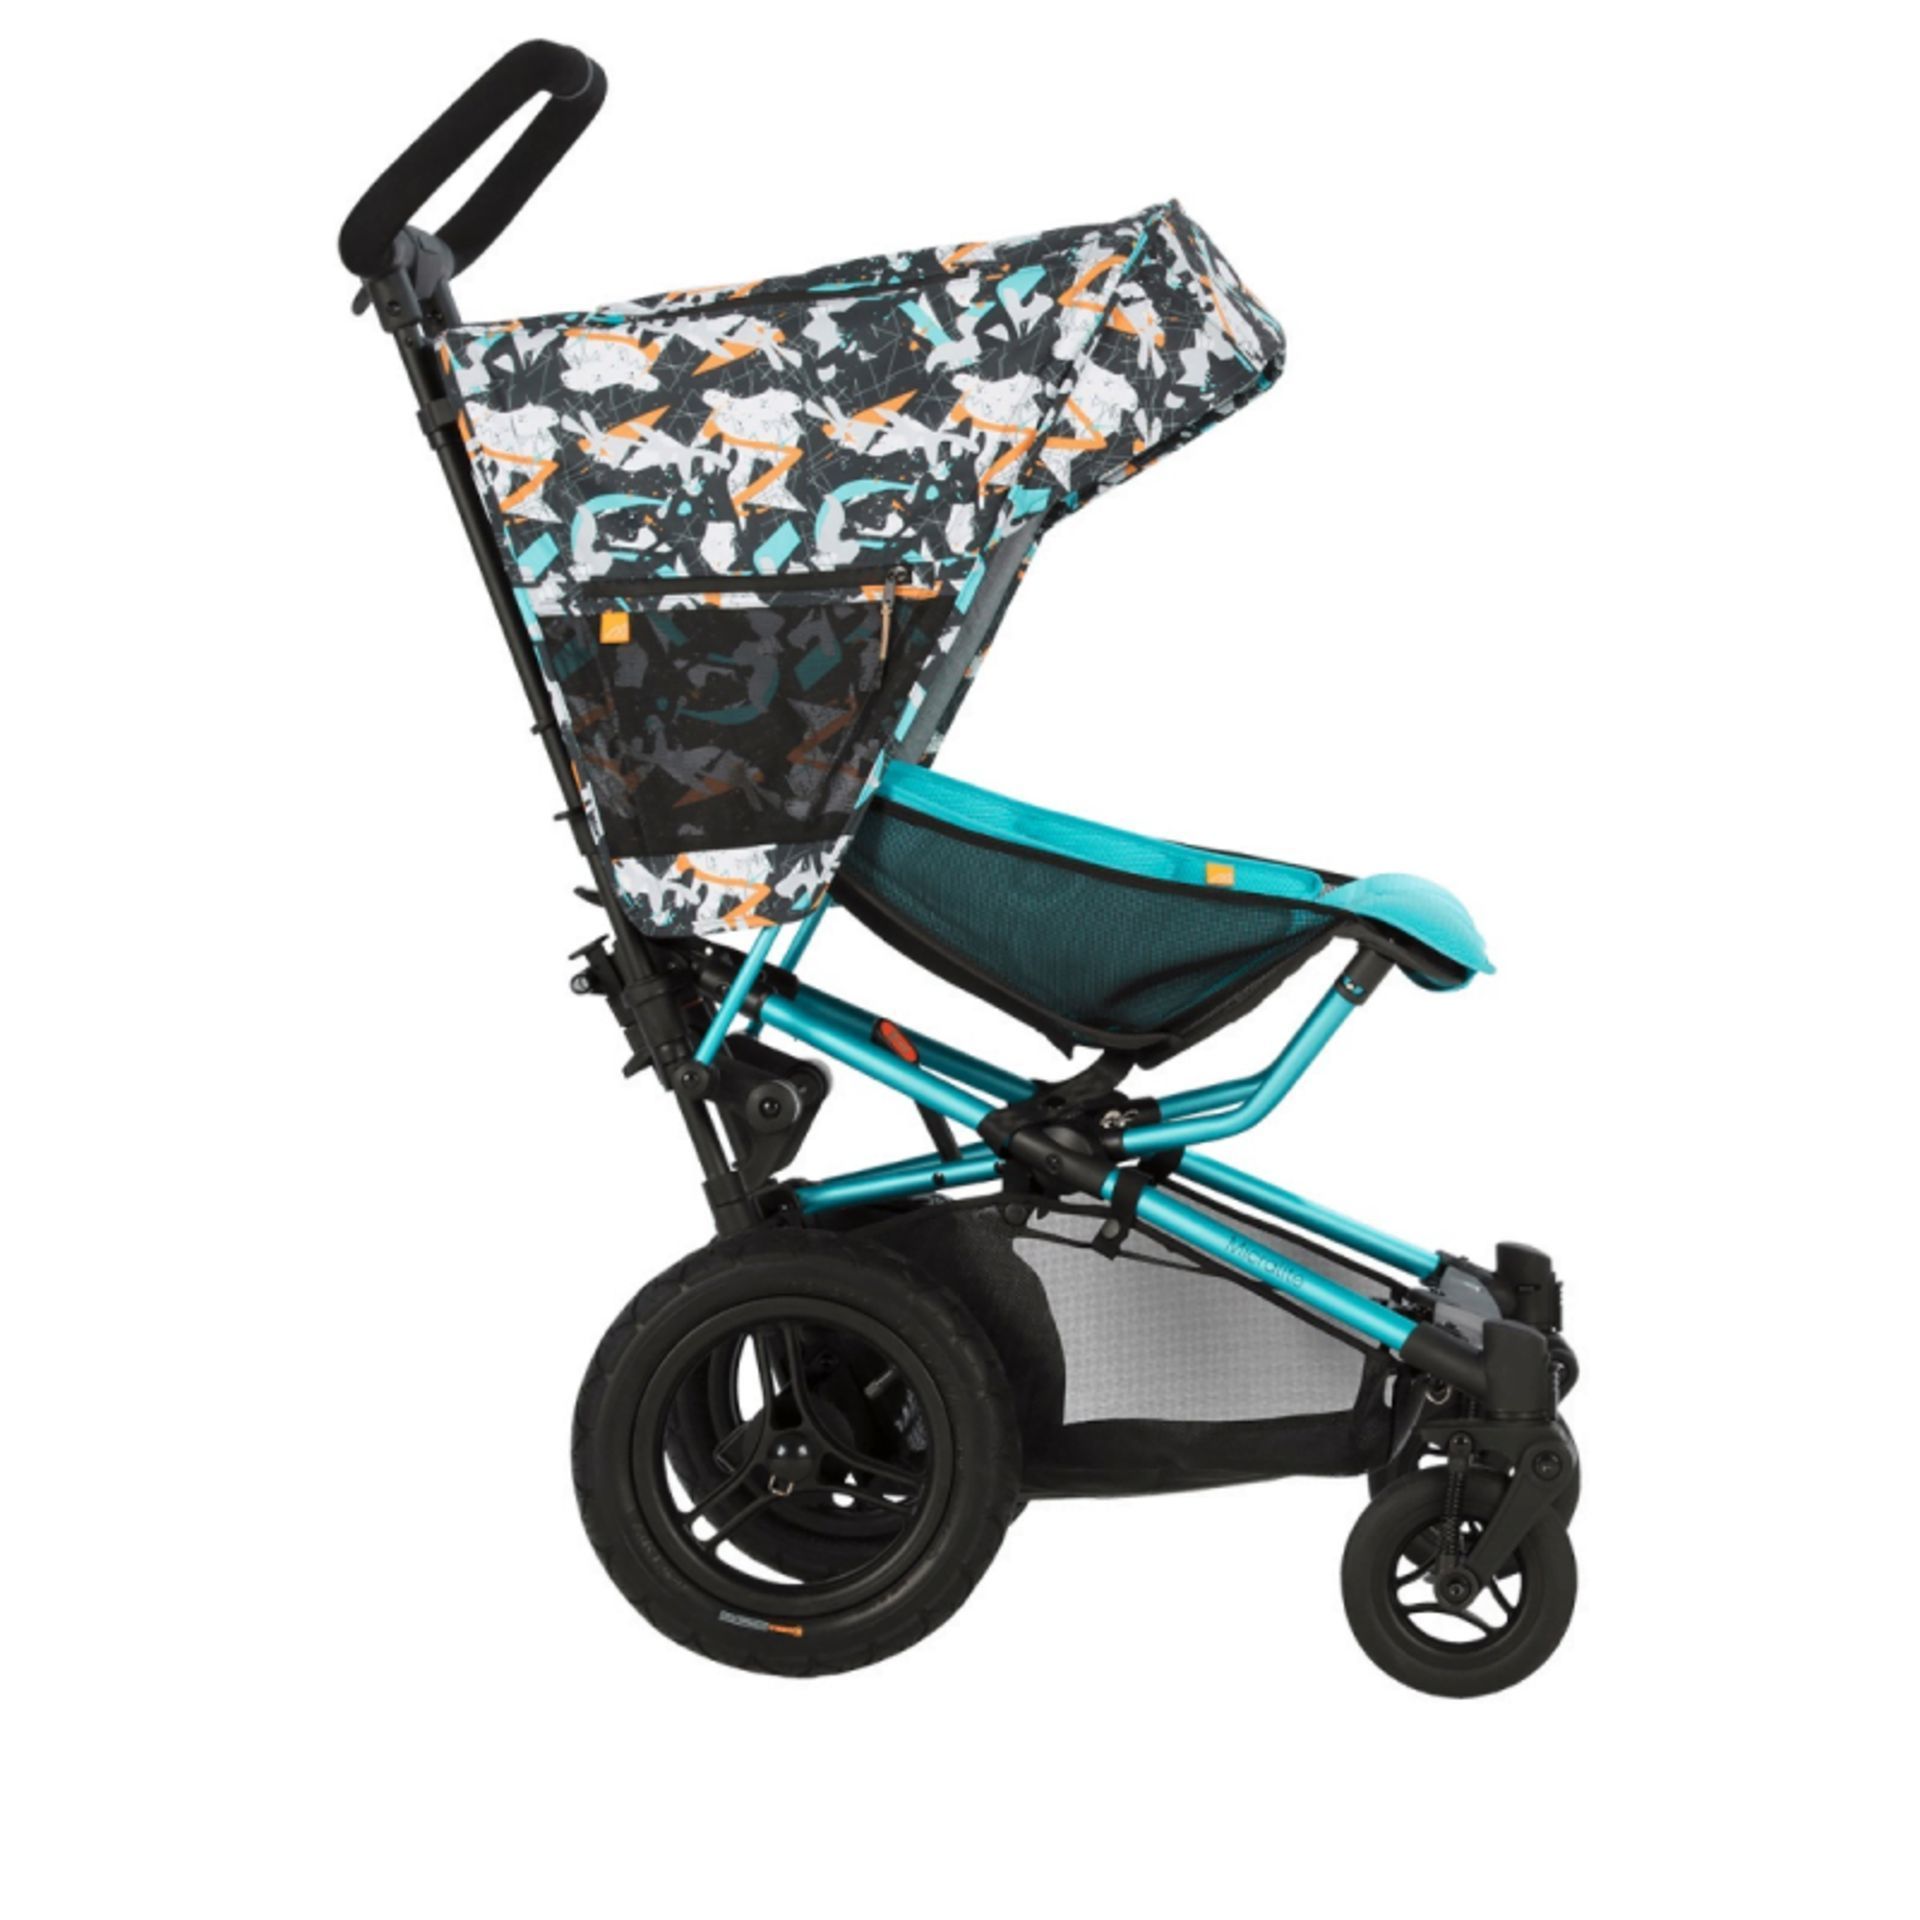 New & Boxed Micralite by Silver Cross FastFold Special Edition Stroller – Festival. RRP £550 each. - Image 3 of 3